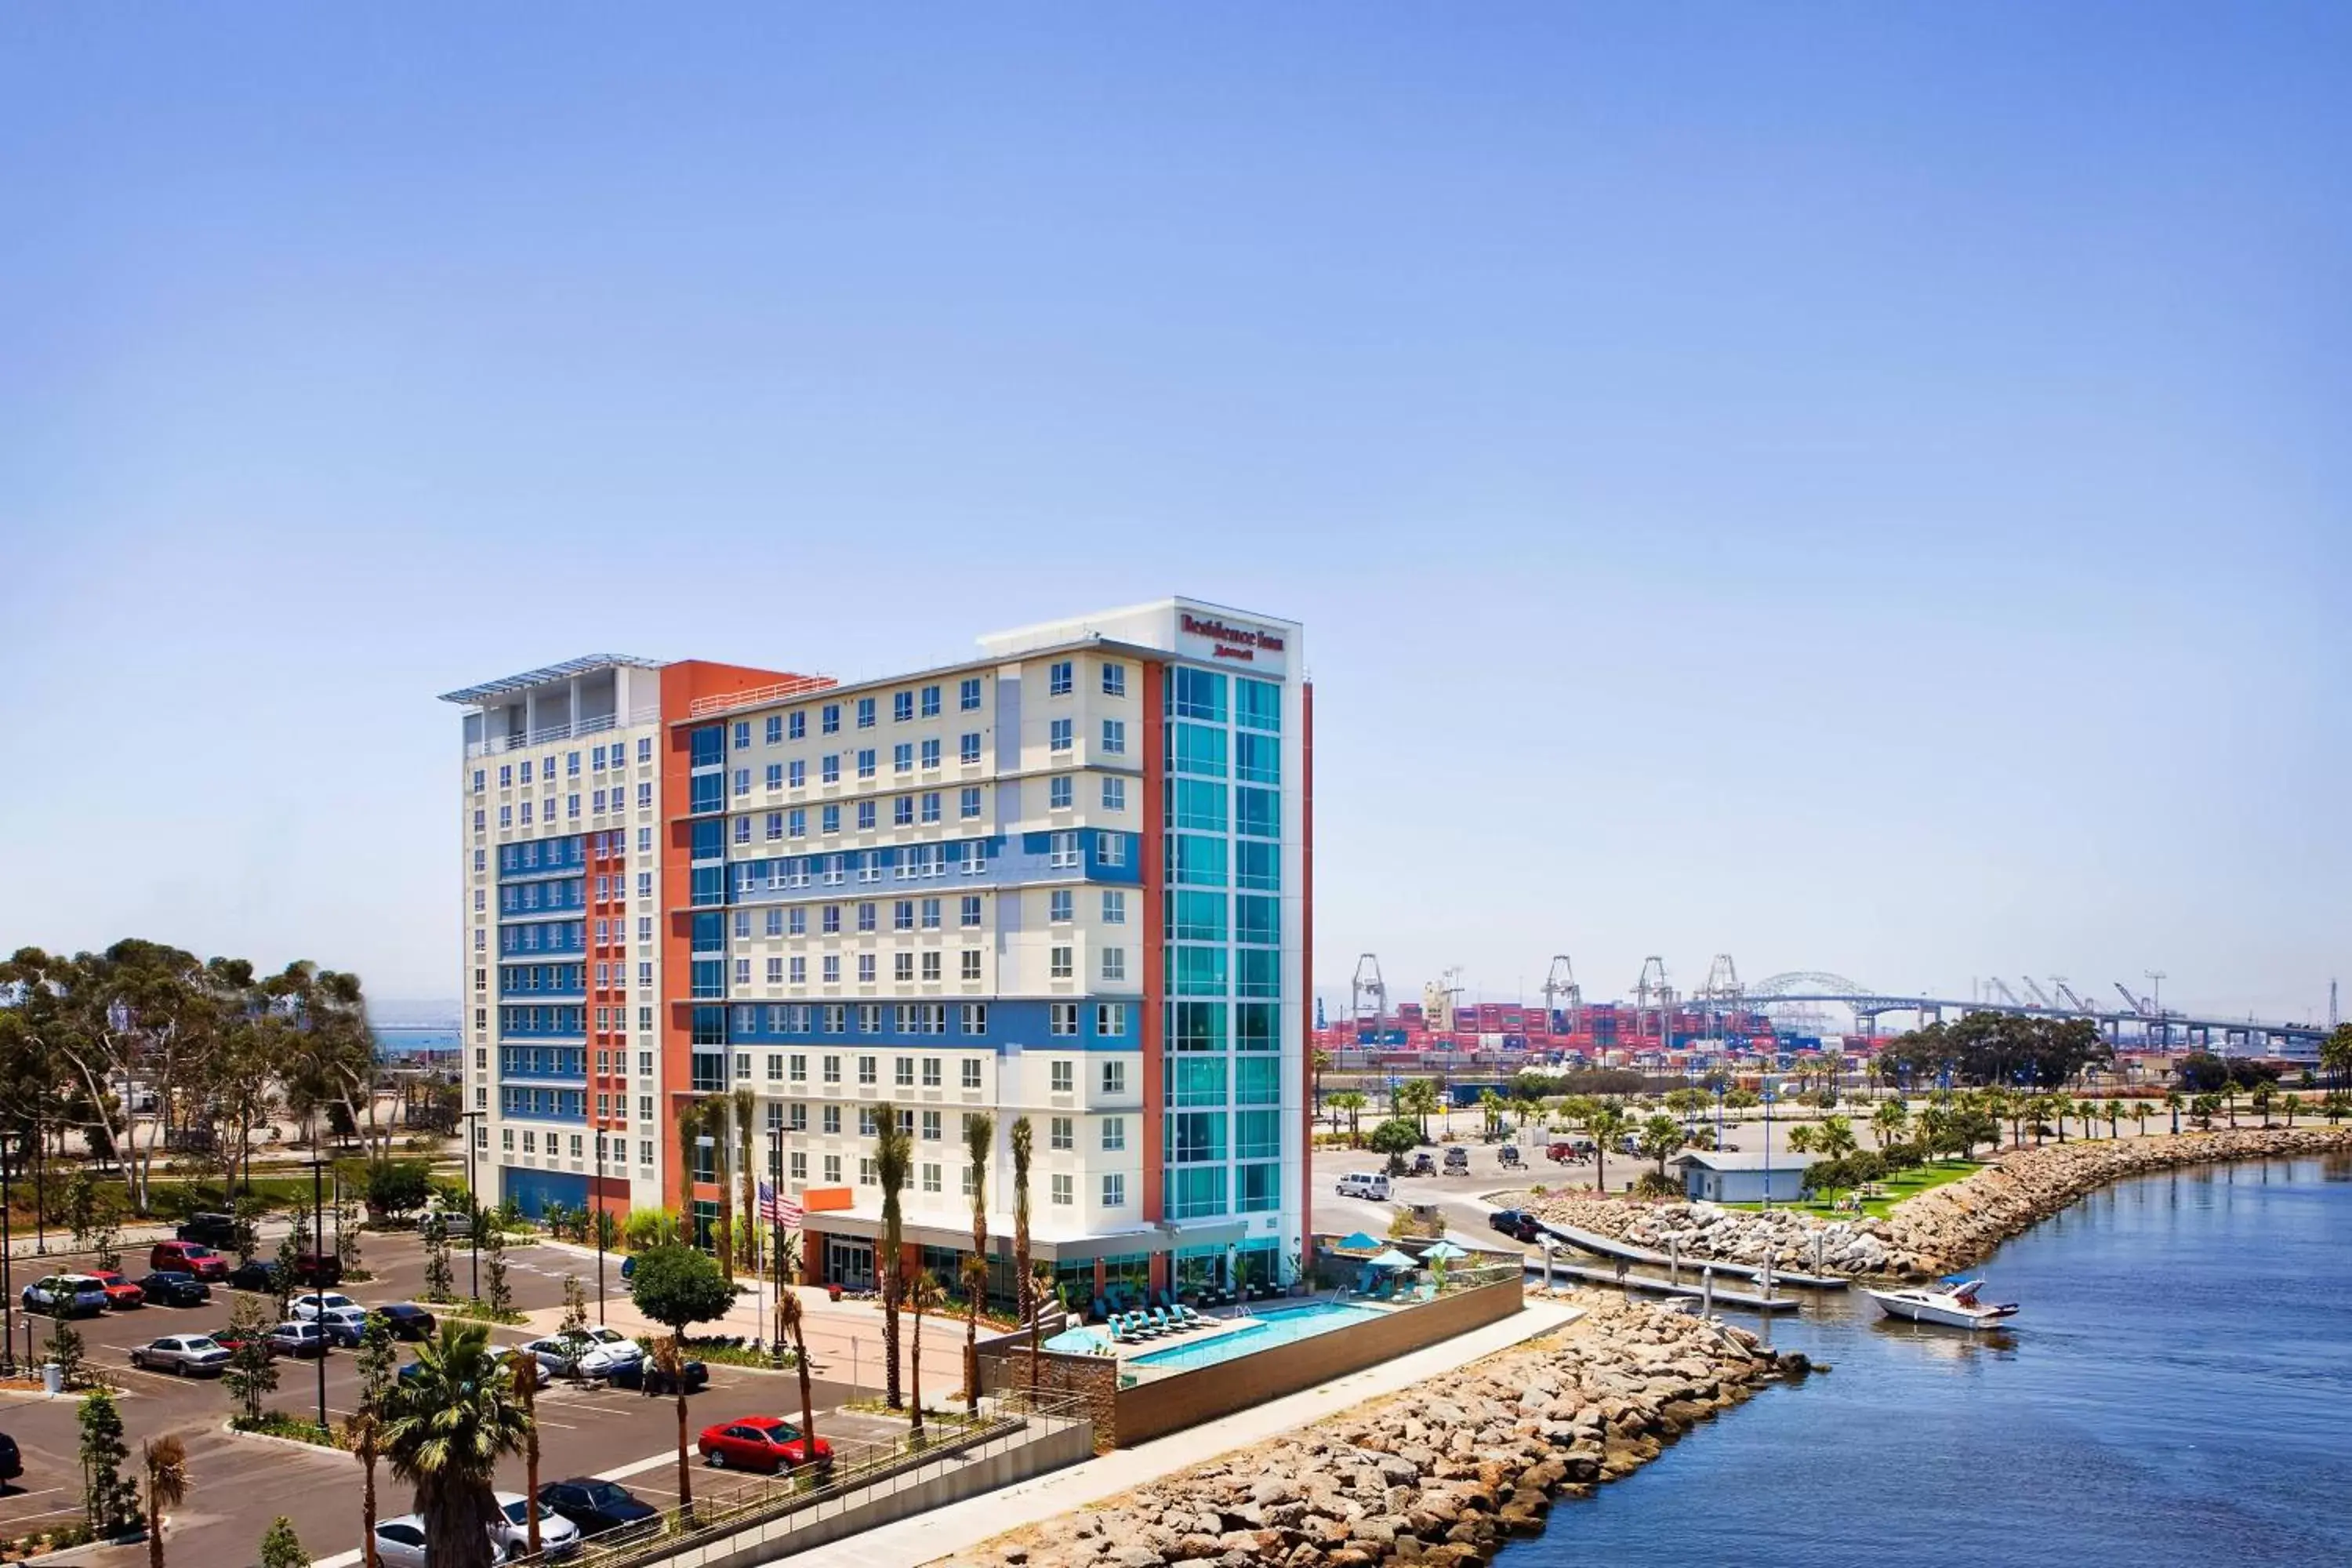 Property building in Residence Inn Long Beach Downtown